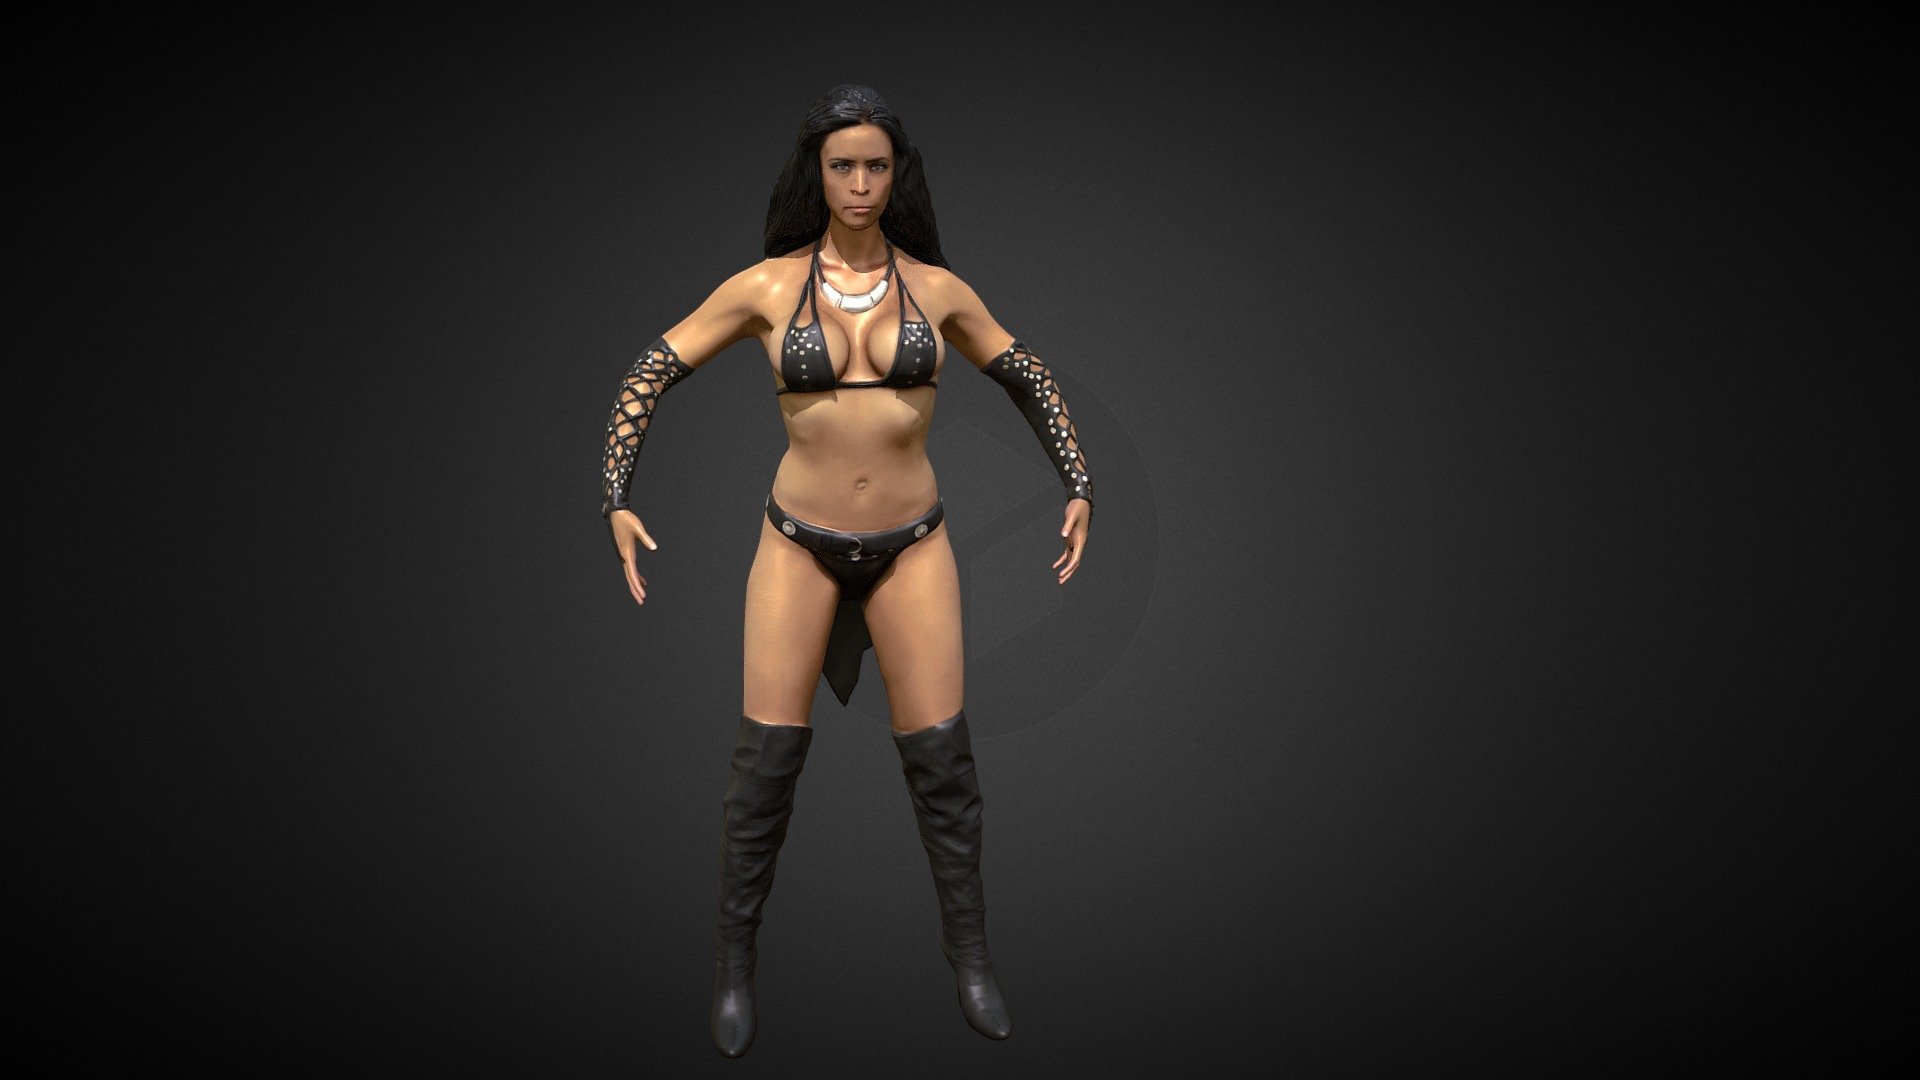 WIld warrior woman - Warrior Woman in A Pose - 3D model by amit3d 3d model